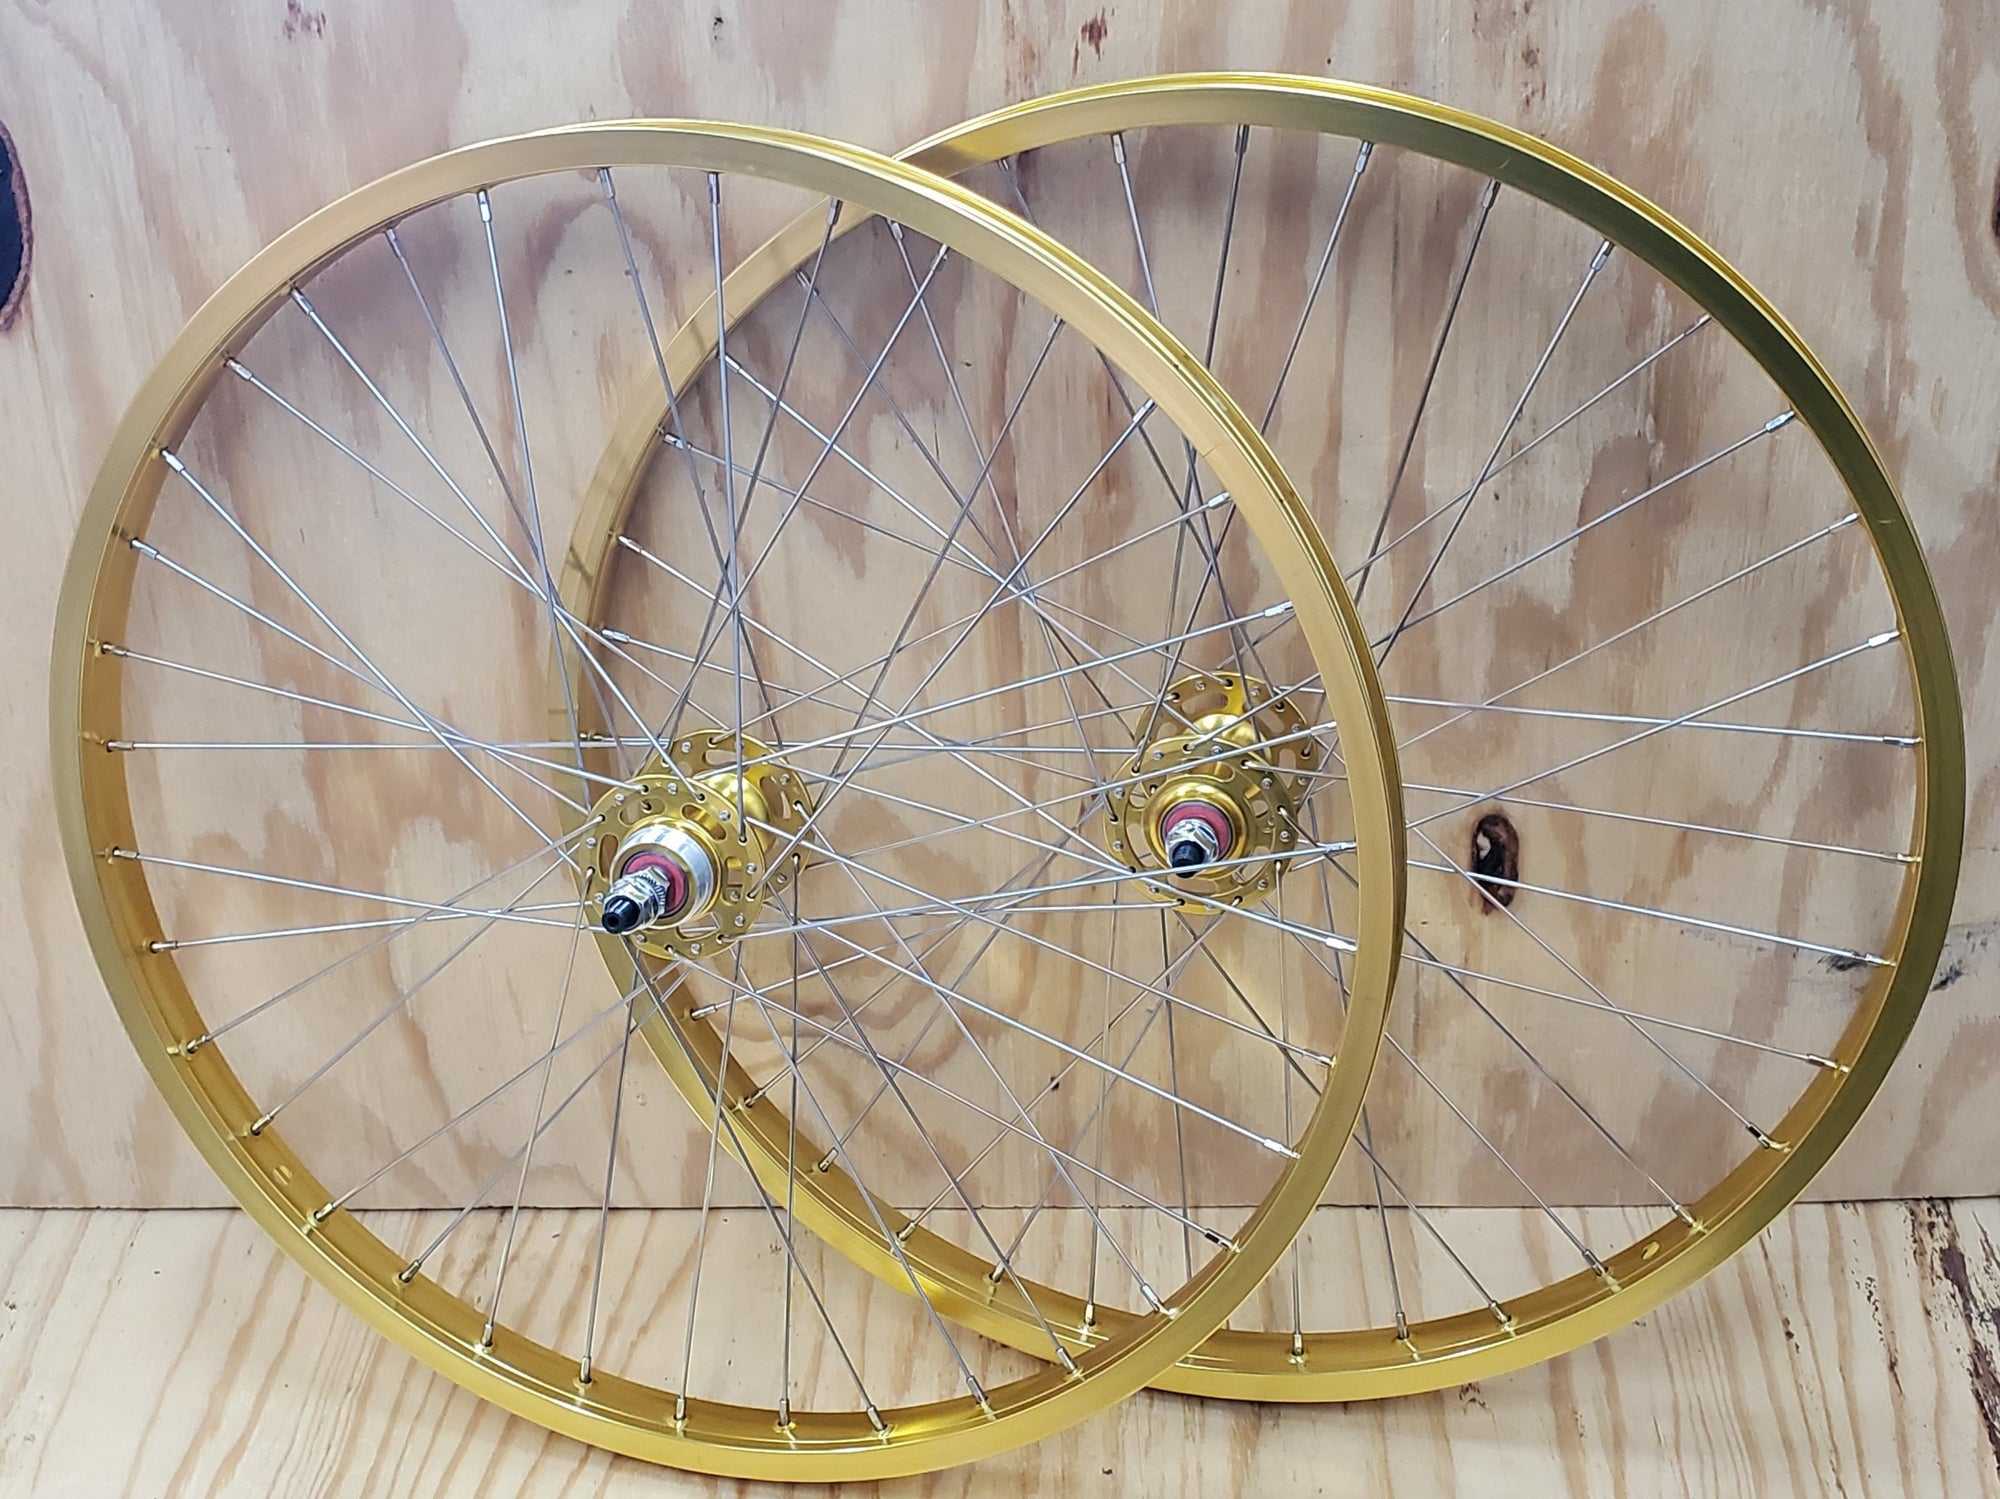 24" 7X style Sealed Road Flange BMX Wheels - Pair - Gold Anodized